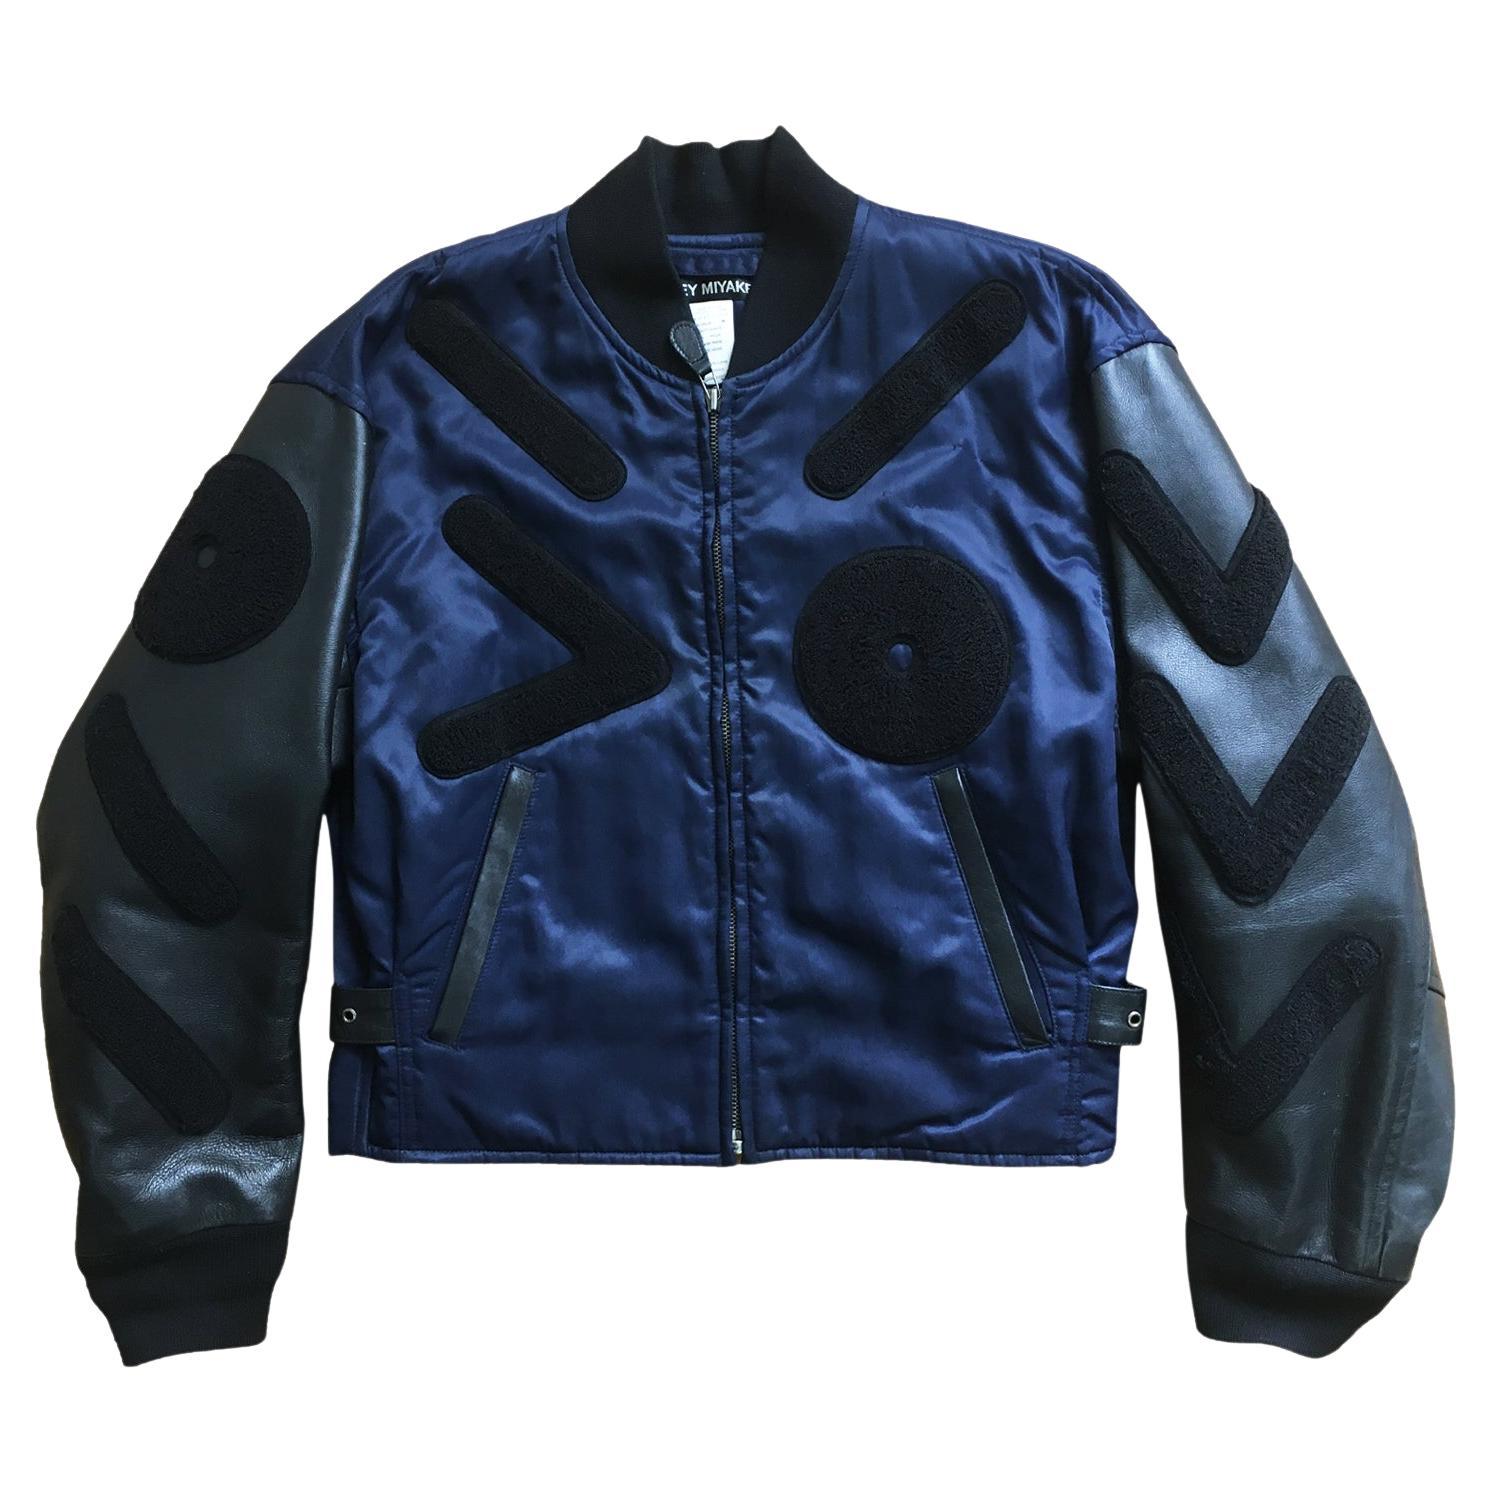 Issey Miyake navy and black patch-appliqué bomber jacket from SS 1994 collection. 
Embroidery detailing at front, sleeves and back with Patch-appliqué with leather on sleeve and pocket
opening.
Lining: cotton 100%, wool 100%
Outer: nylon 100%

Size